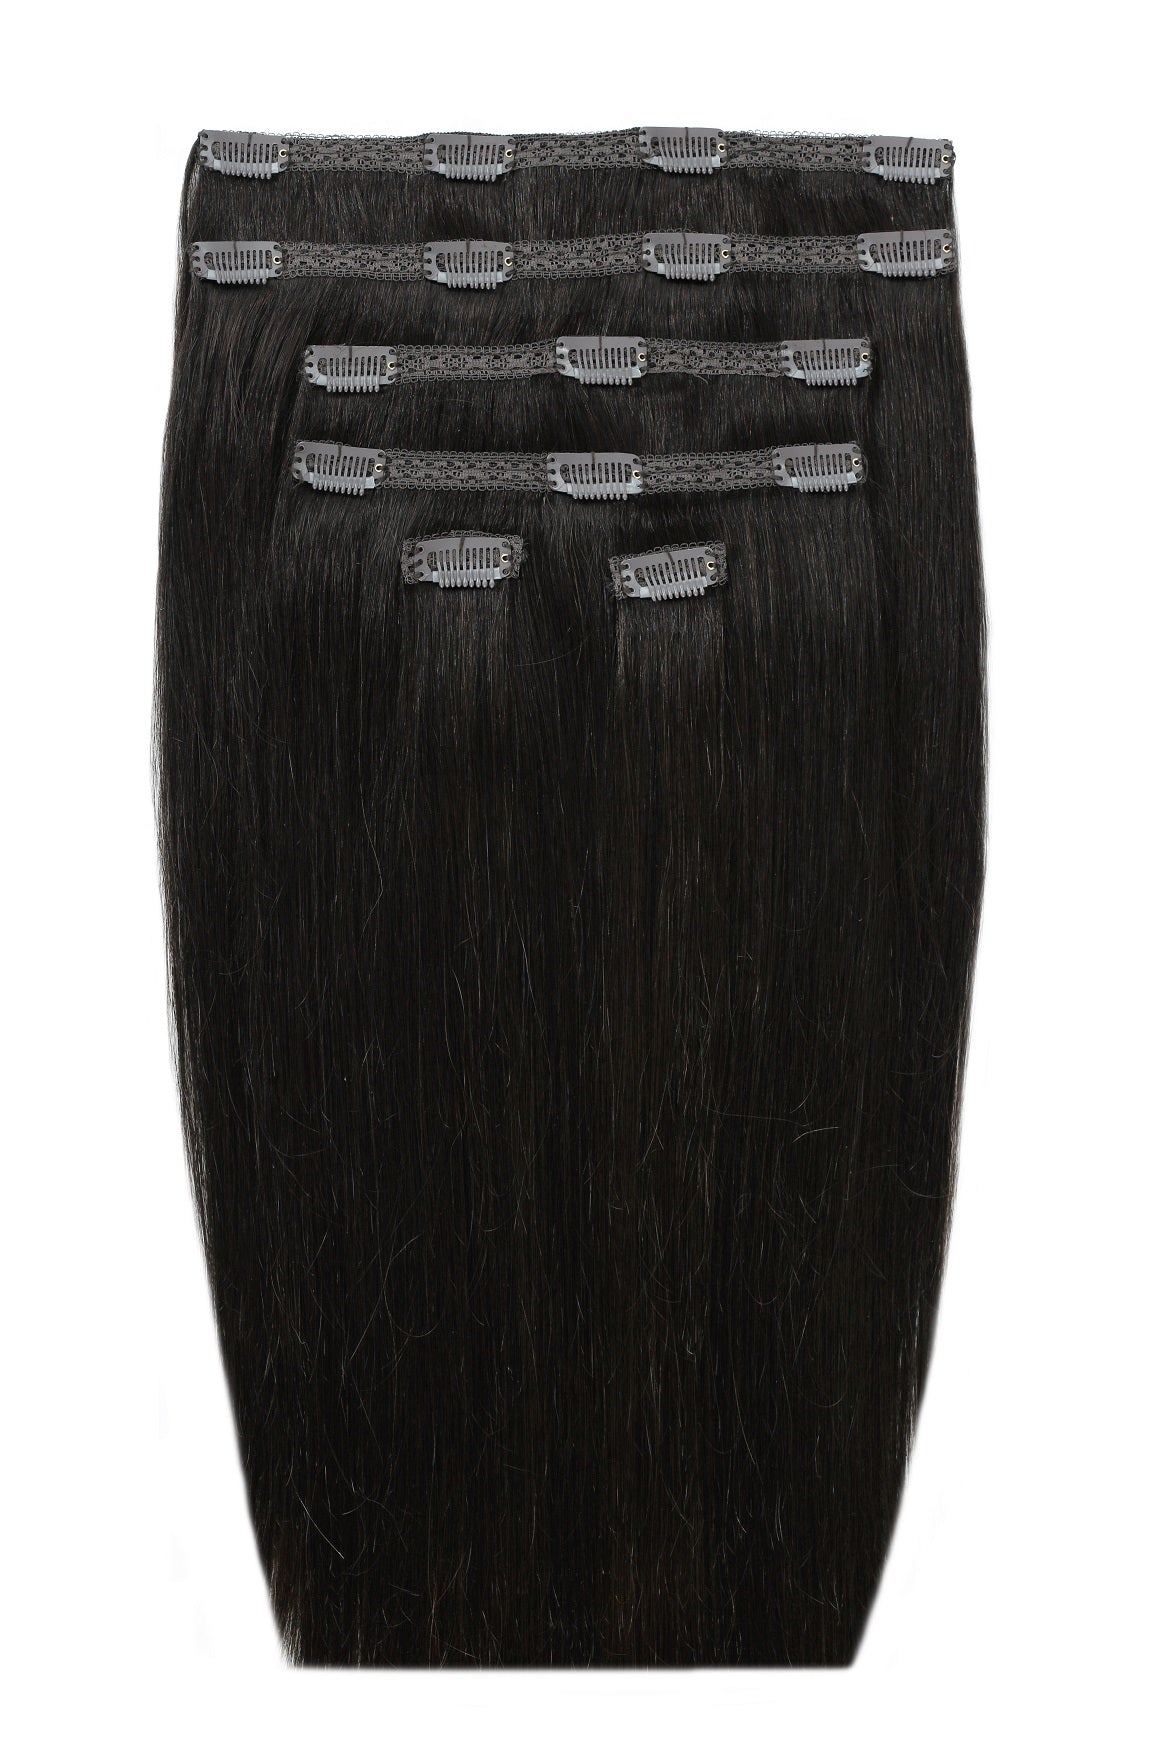 Beauty Works - Double Hair Set 22" (#1A Natural Black)